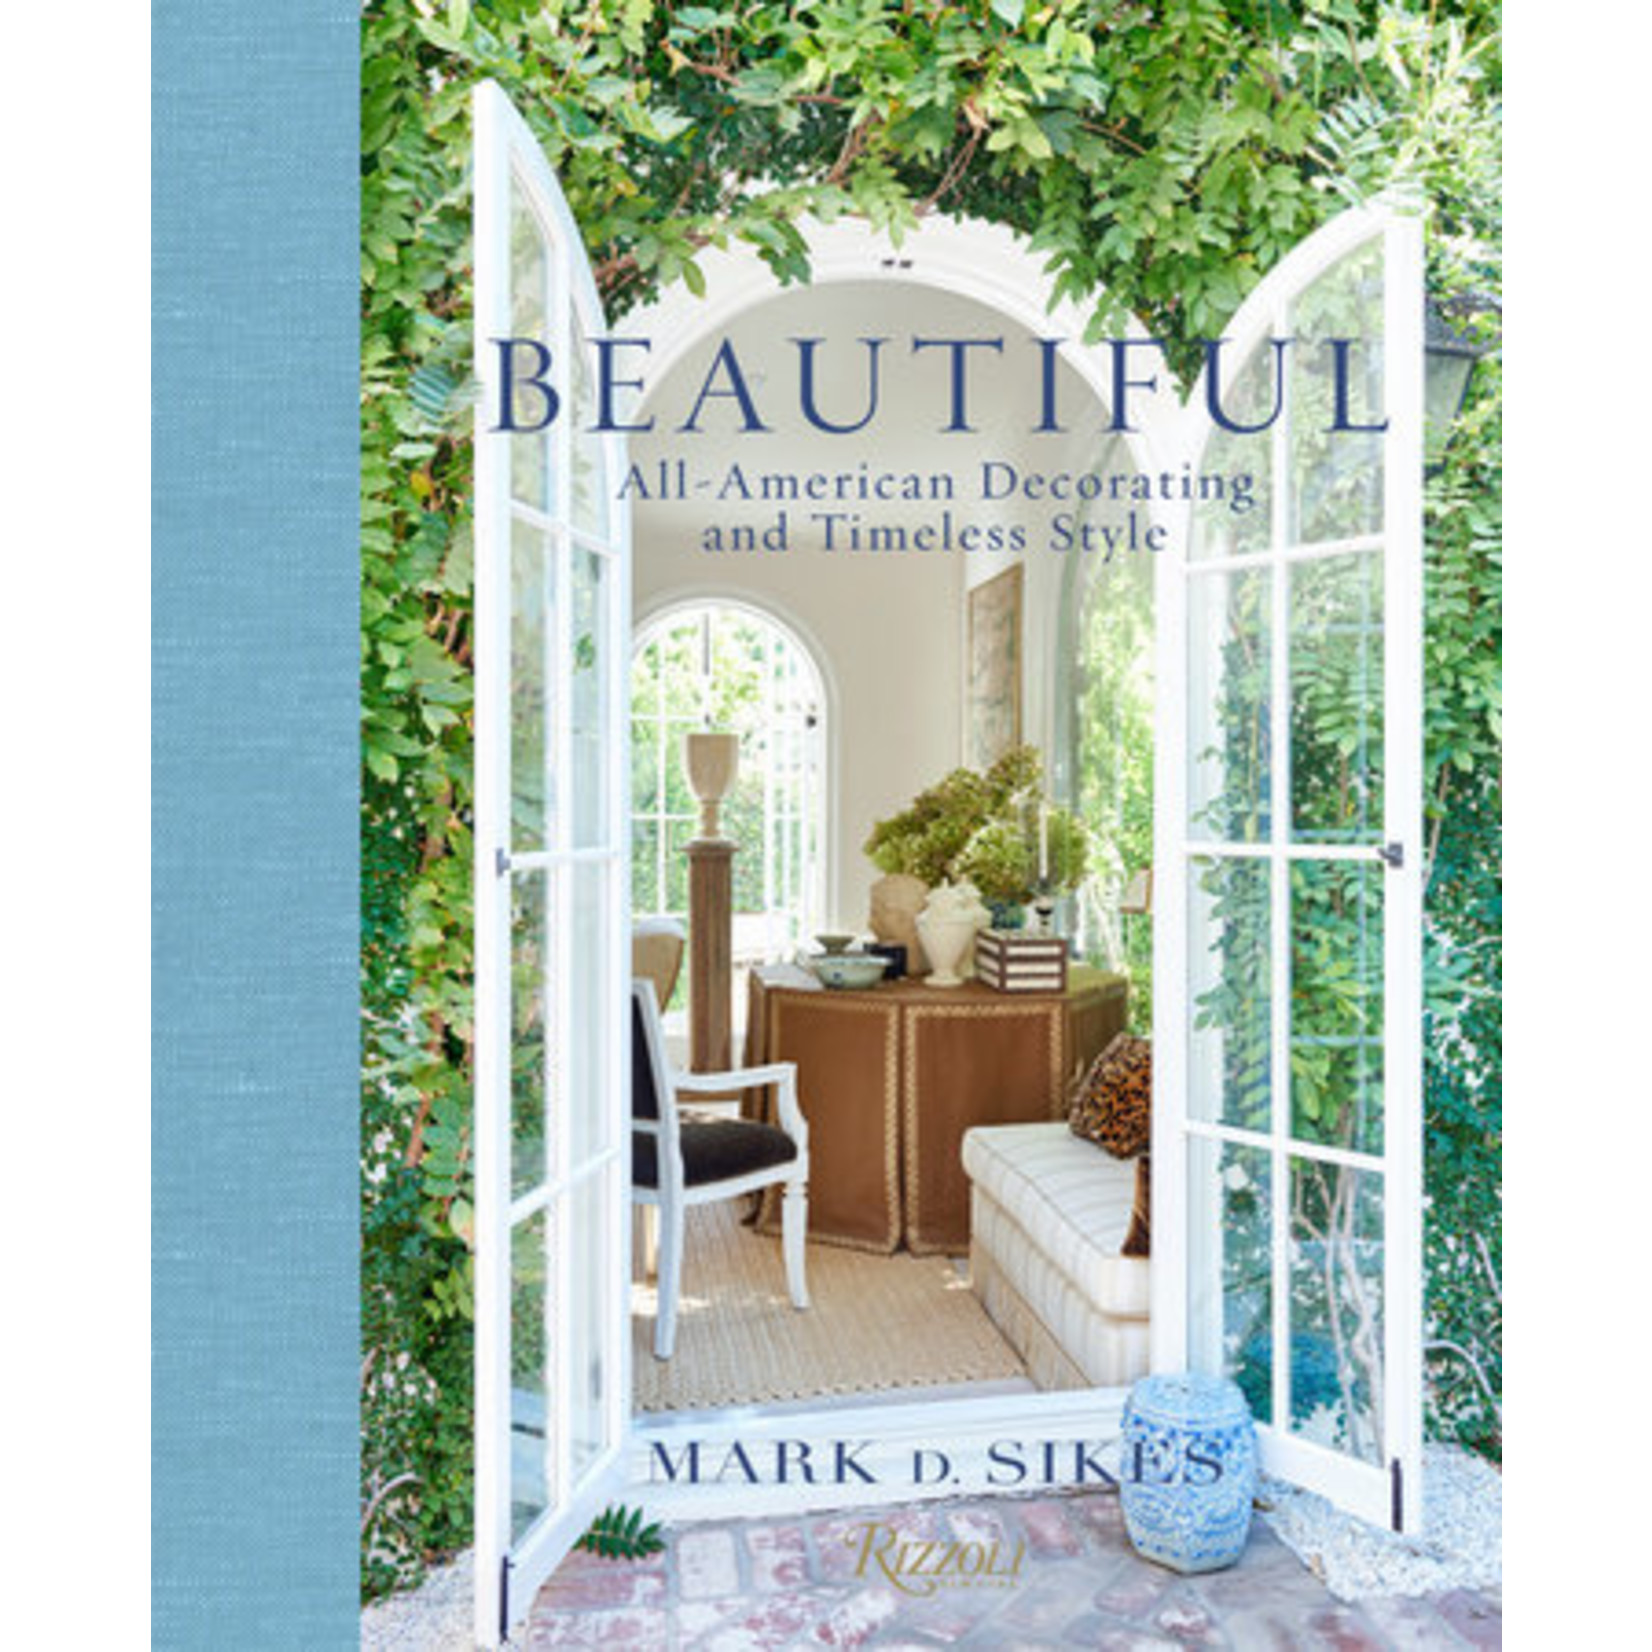 Penguin Random House Beautiful: All-American Decorating and Timeless Style